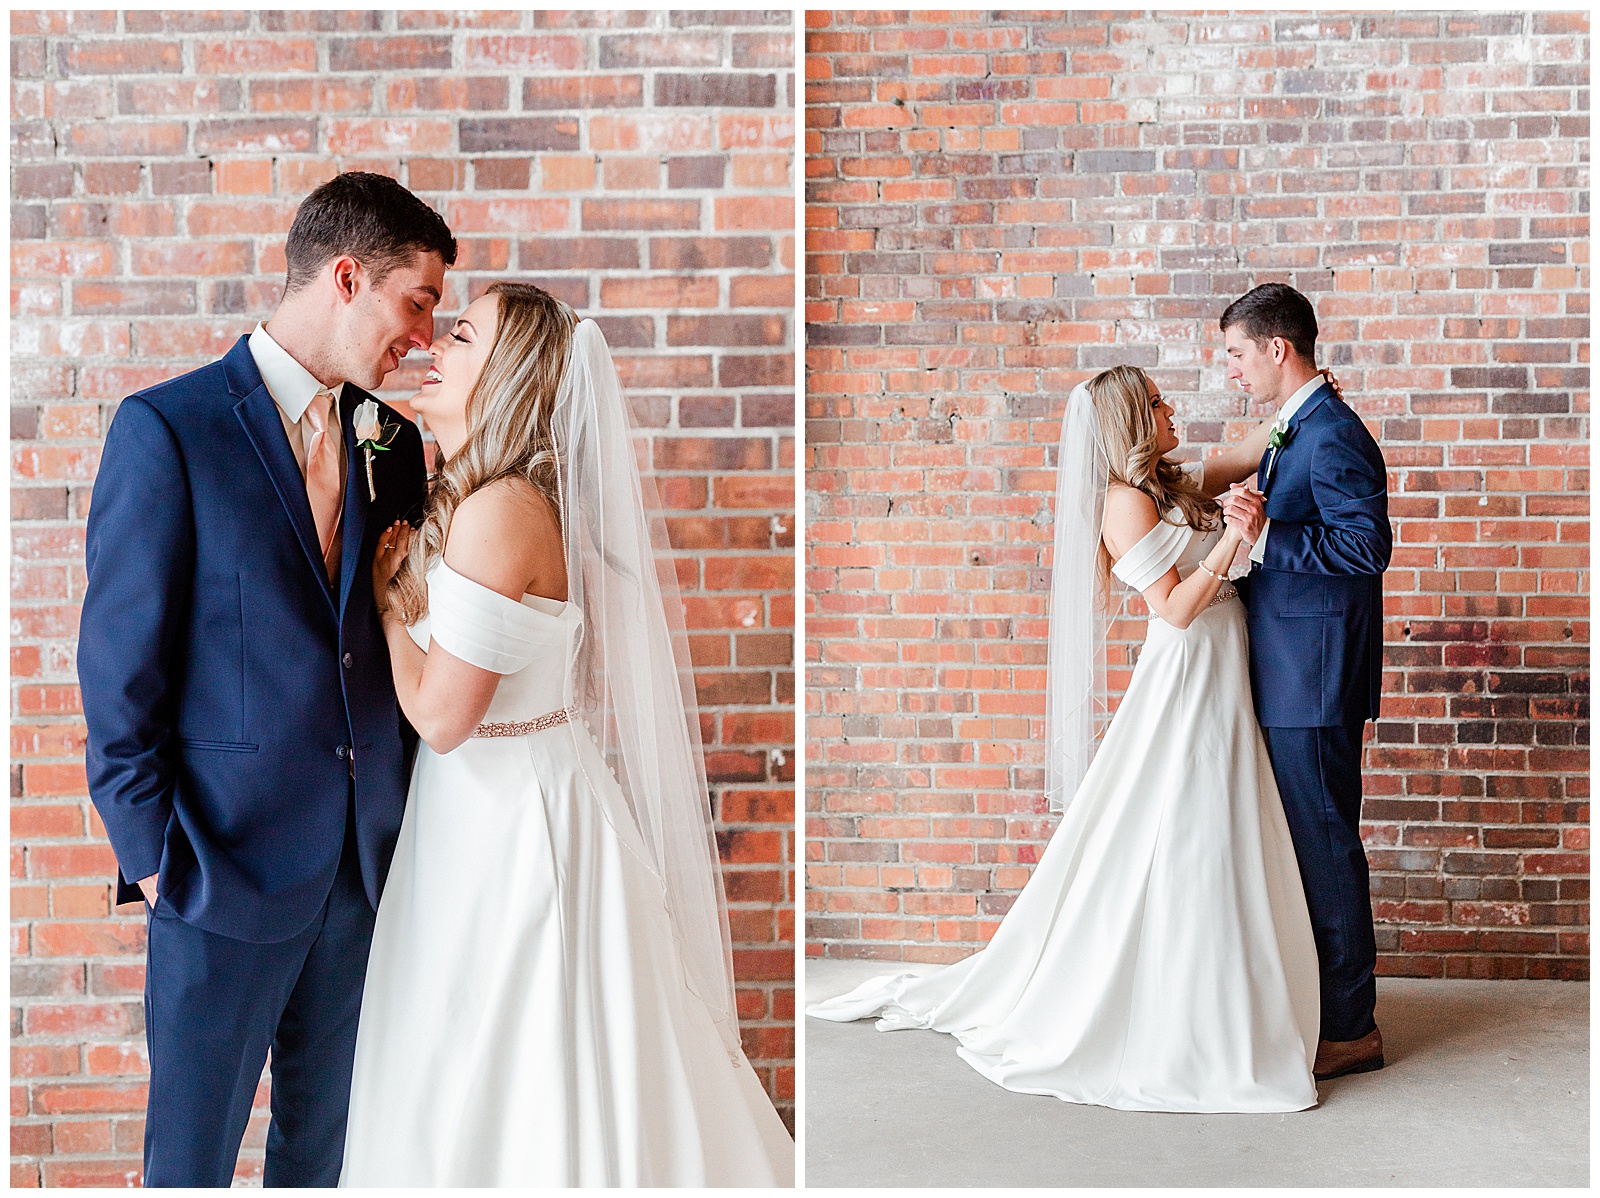 Adorable Bride and Groom Portraits against a red brick wall from Summer Wedding in Charlotte, NC | Check out the full wedding at KevynDixonPhoto.com